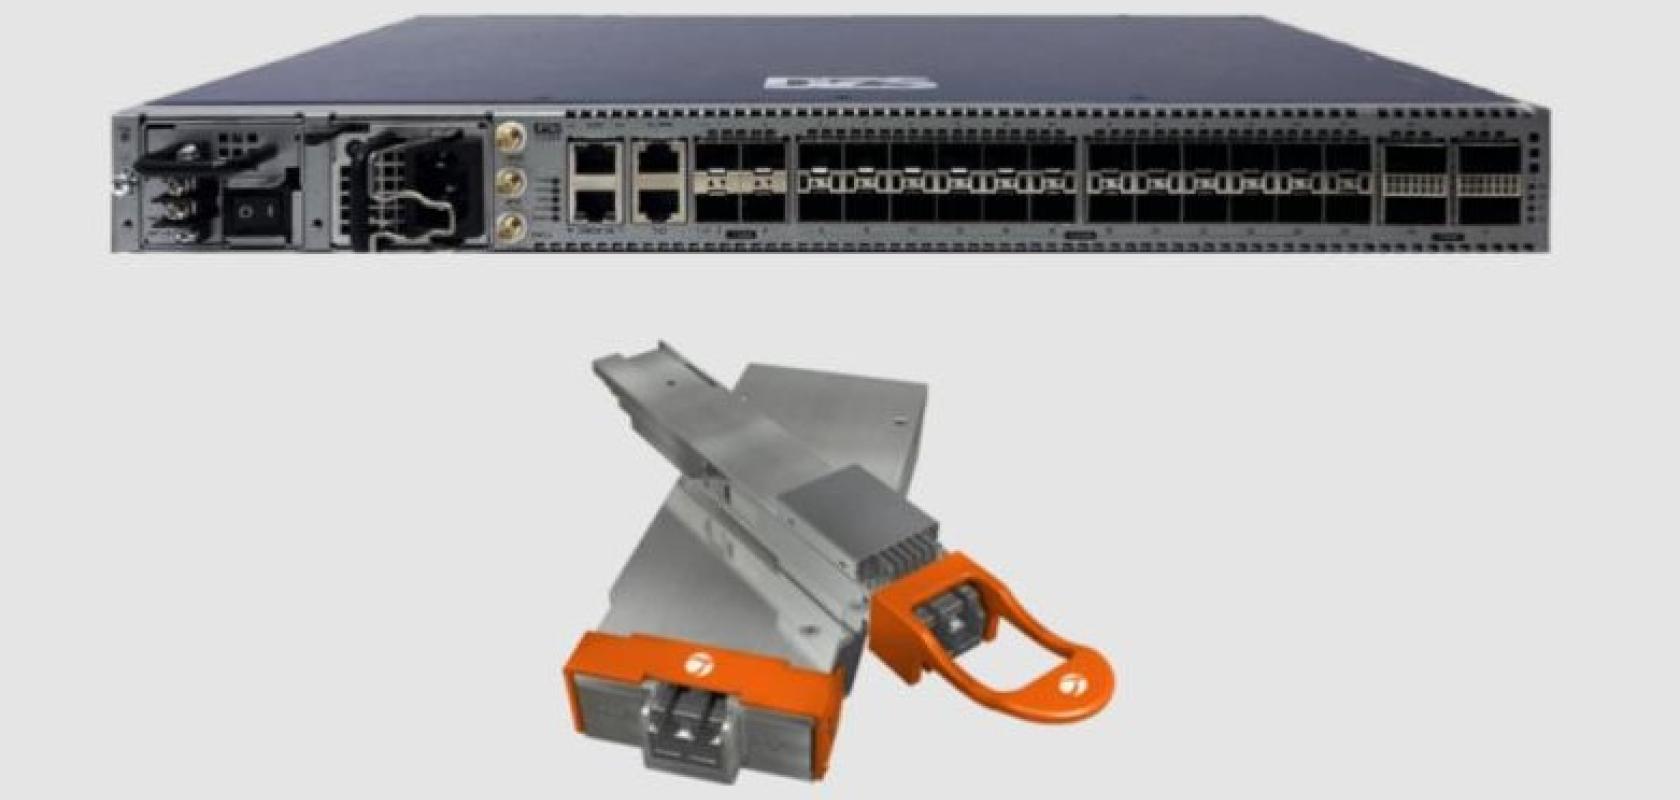 DZS and Infinera’s coherent pluggable solution combines the new DZS Saber 2200 with Infinera’s ICE-X 400G intelligent coherent pluggable (Credit: DZS and Infinera)